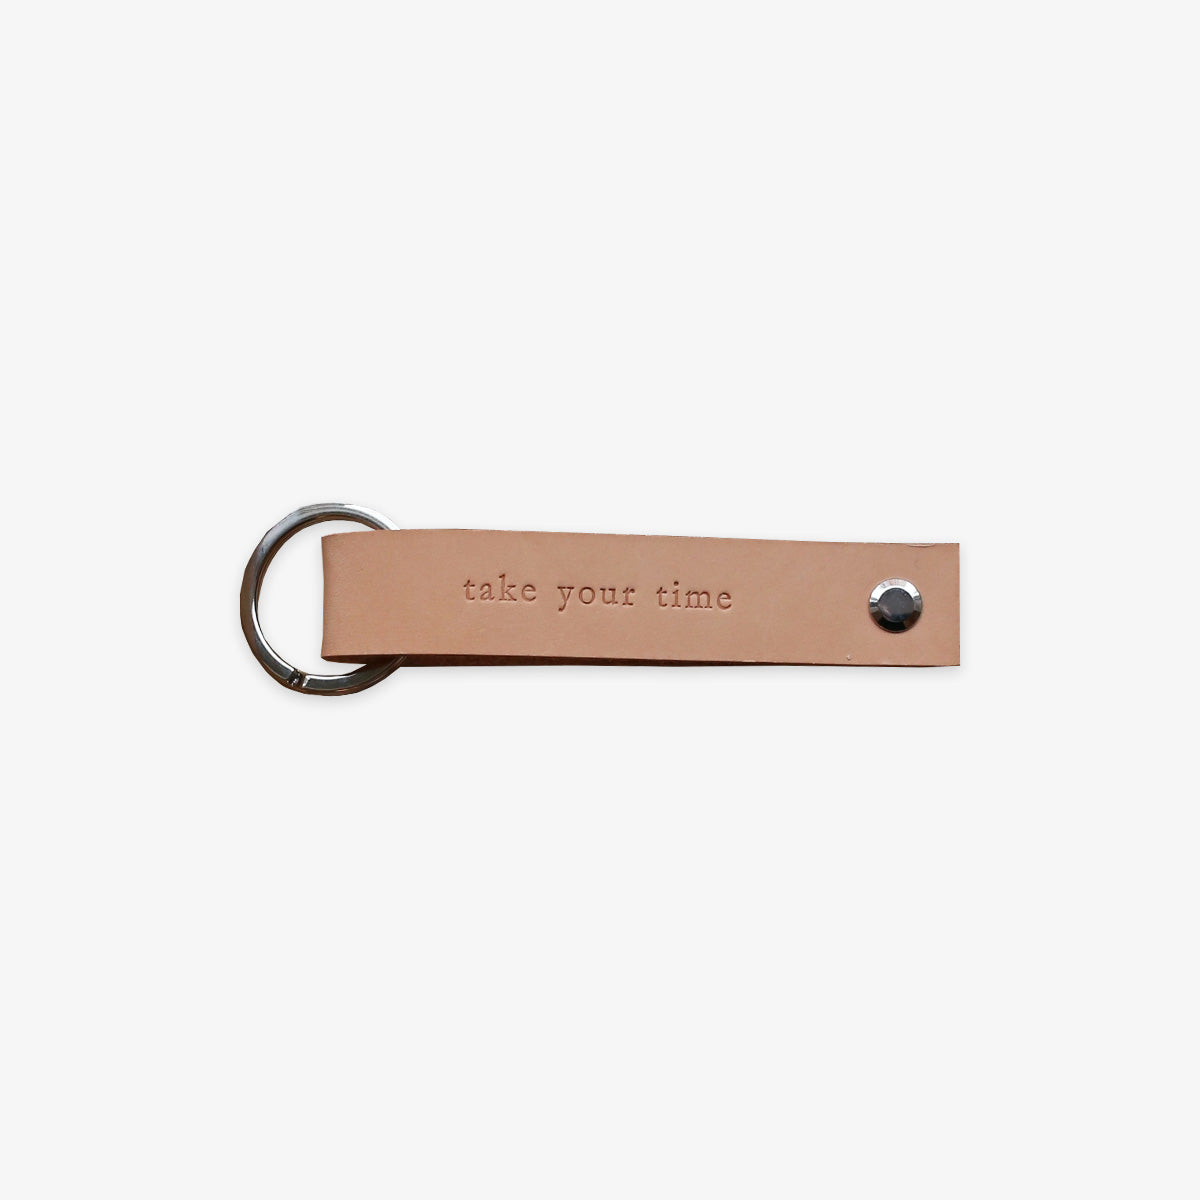 LEATHER KEY HOLDER // TAKE YOUR TIME II